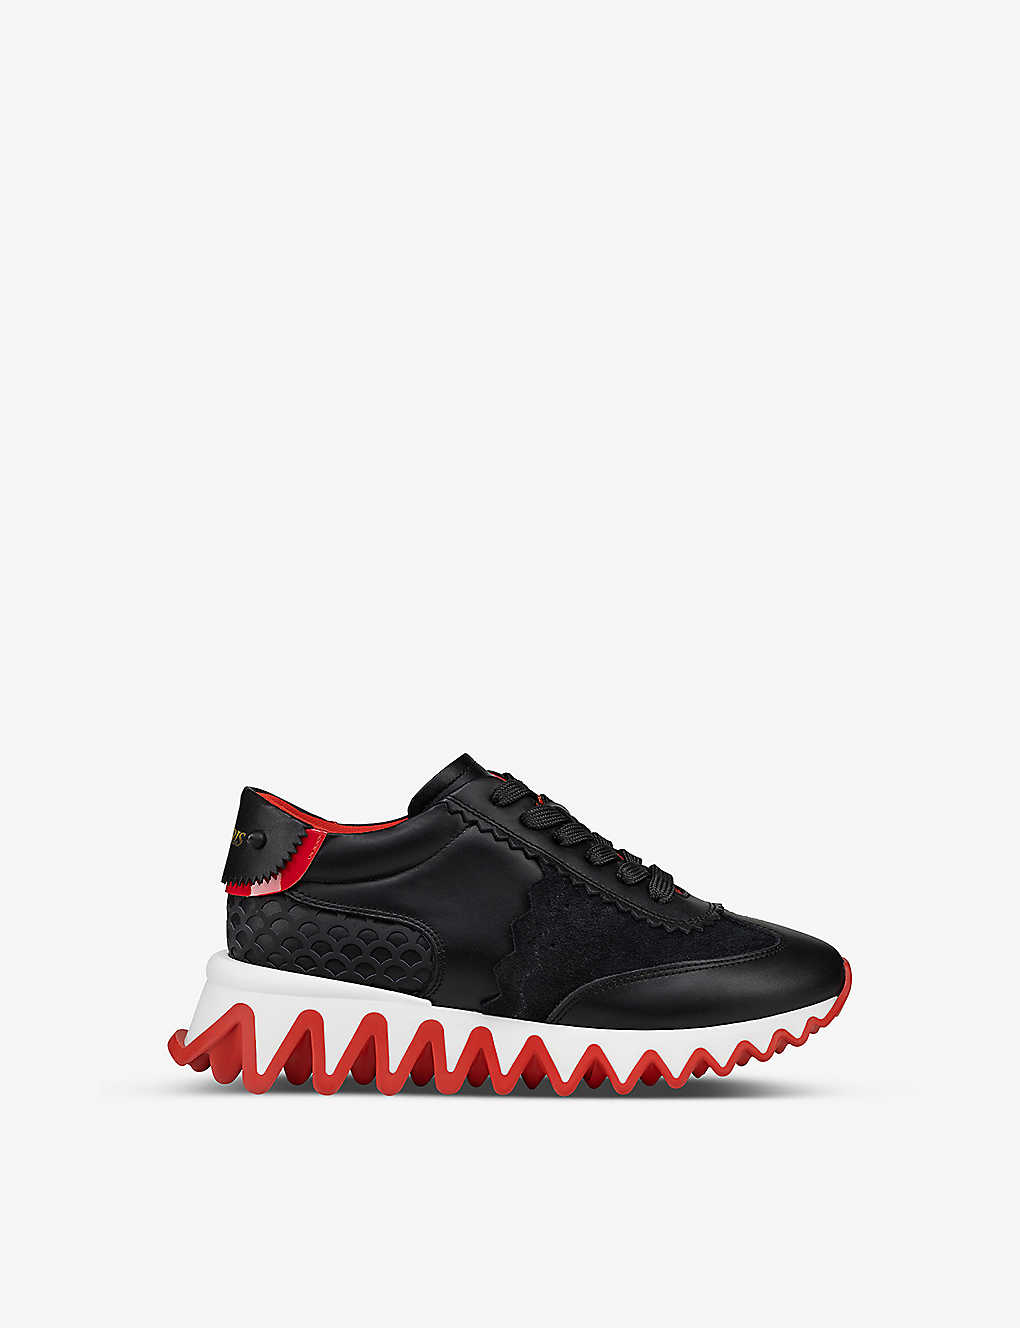 Christian Louboutin Boys Black Kids Mini Shark Sculptural-sole Leather Low-top Trainers 4-9 Years